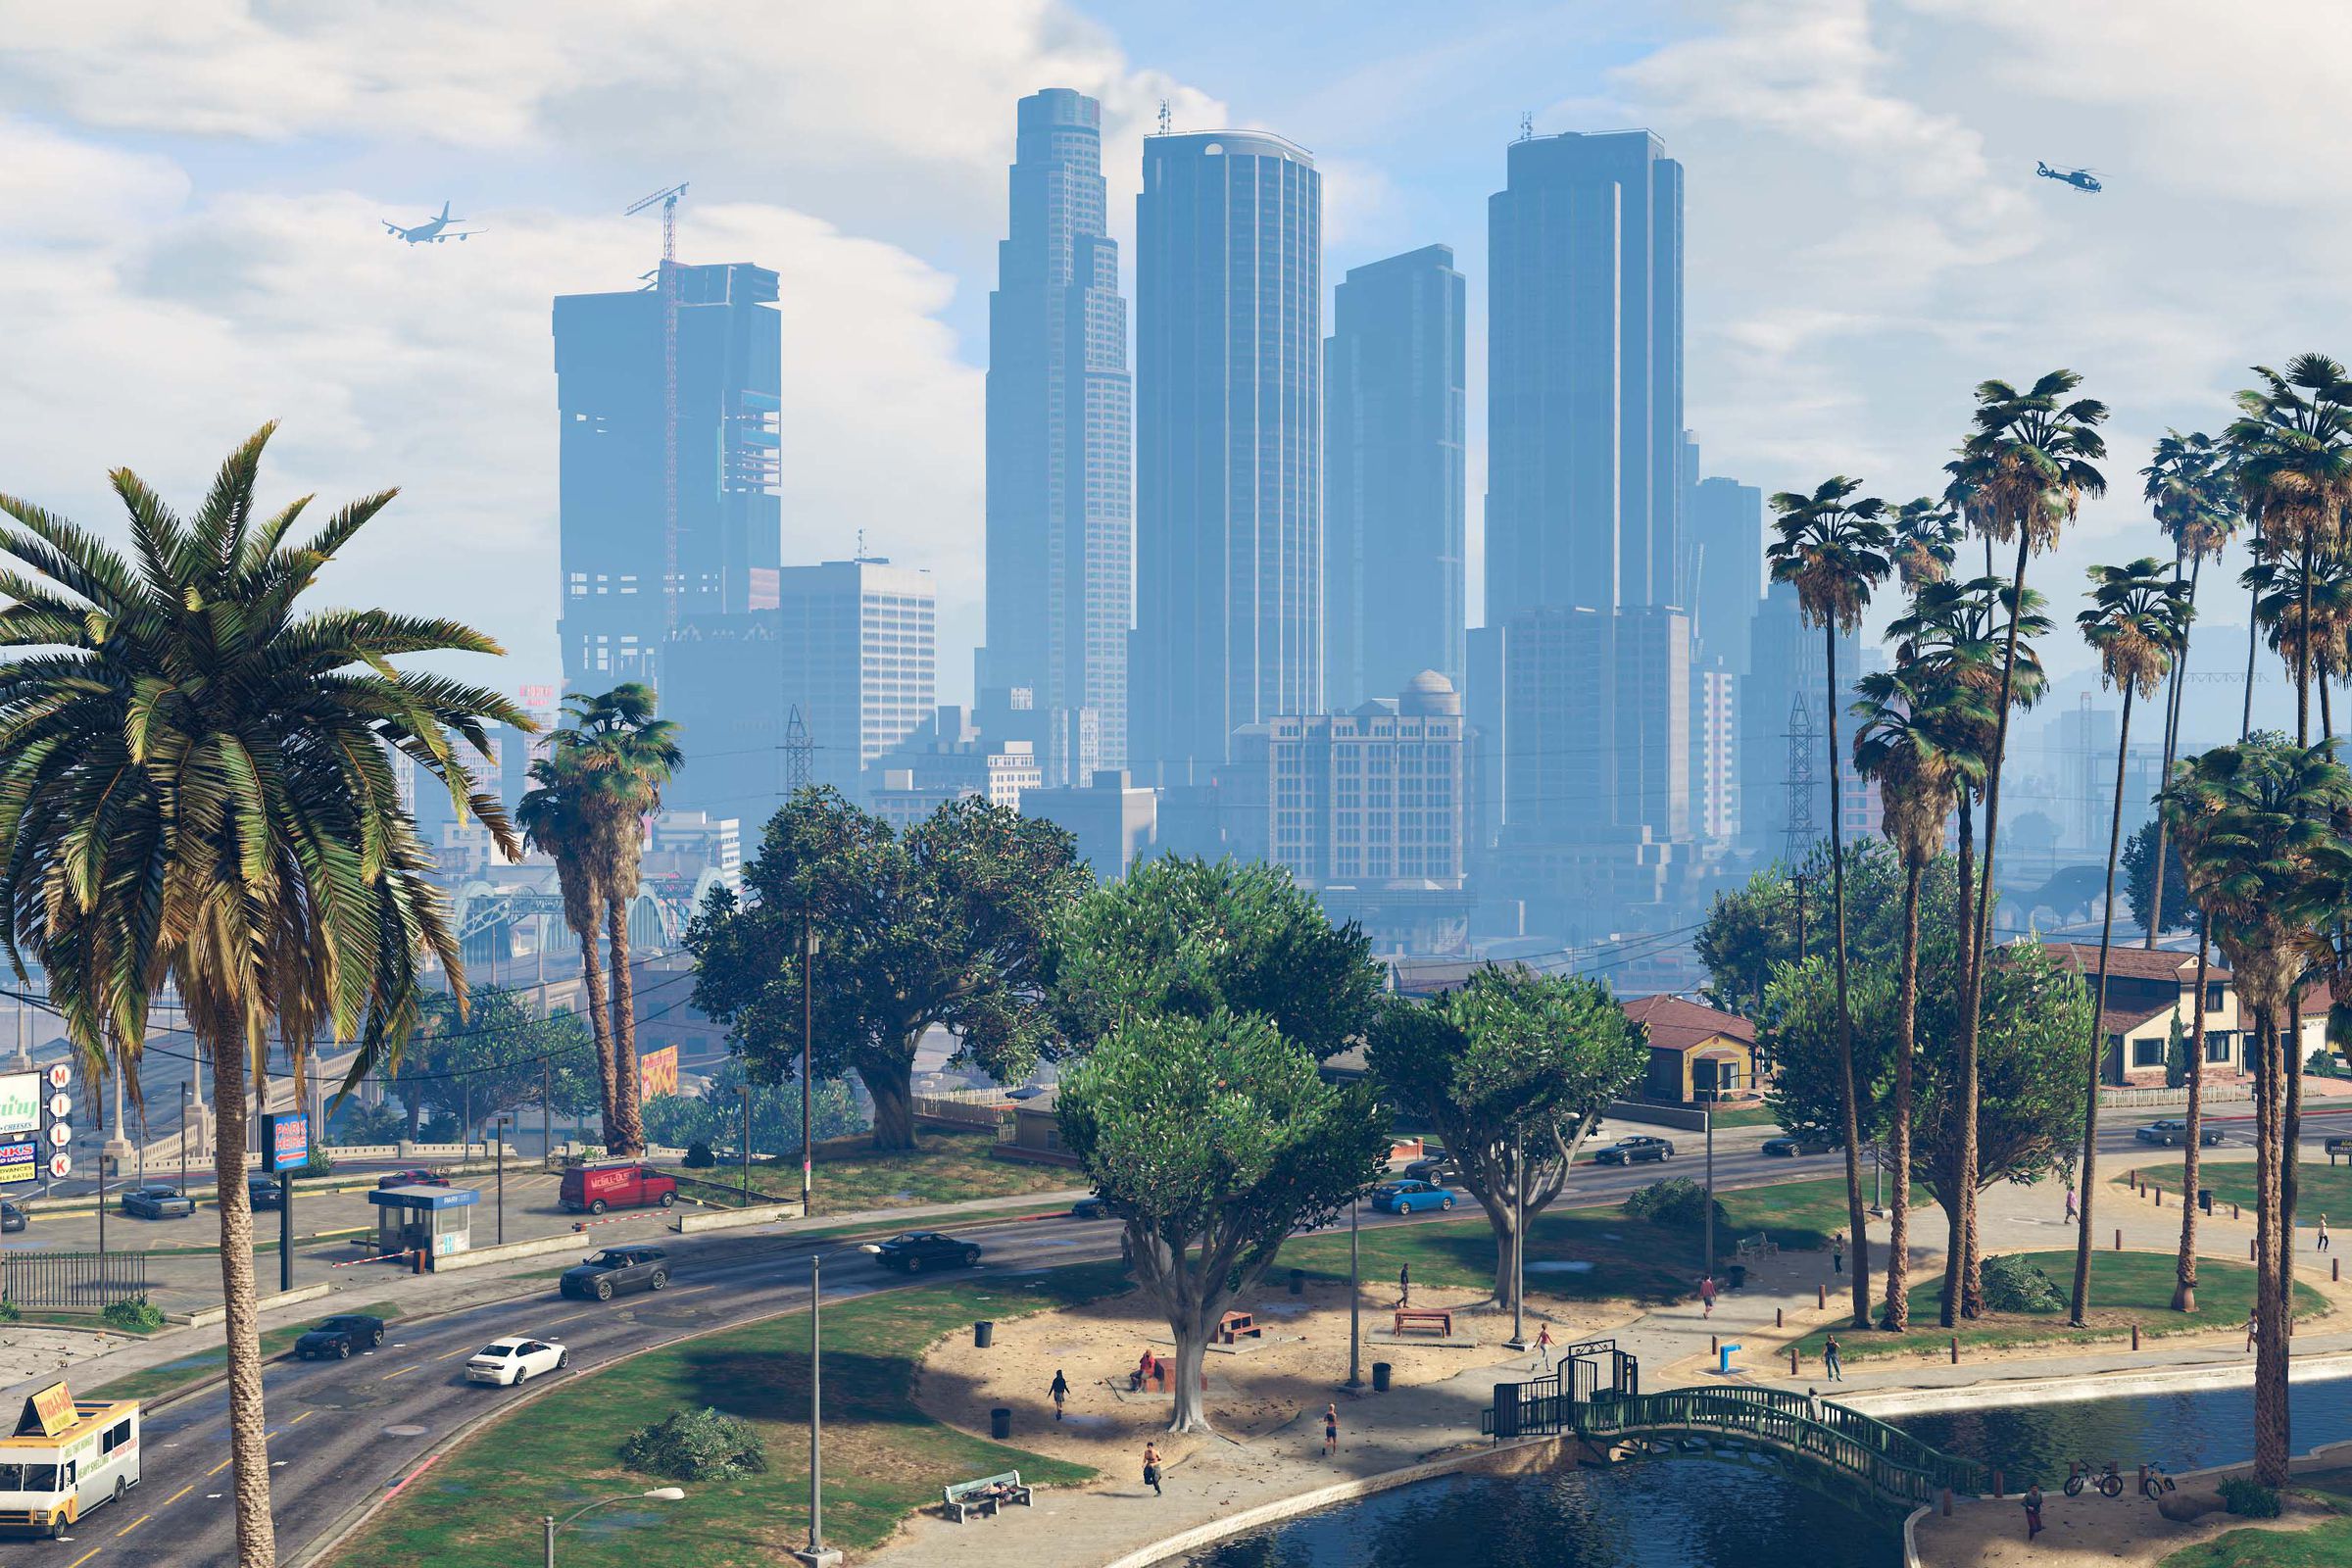 GTA V was released almost nine years ago.